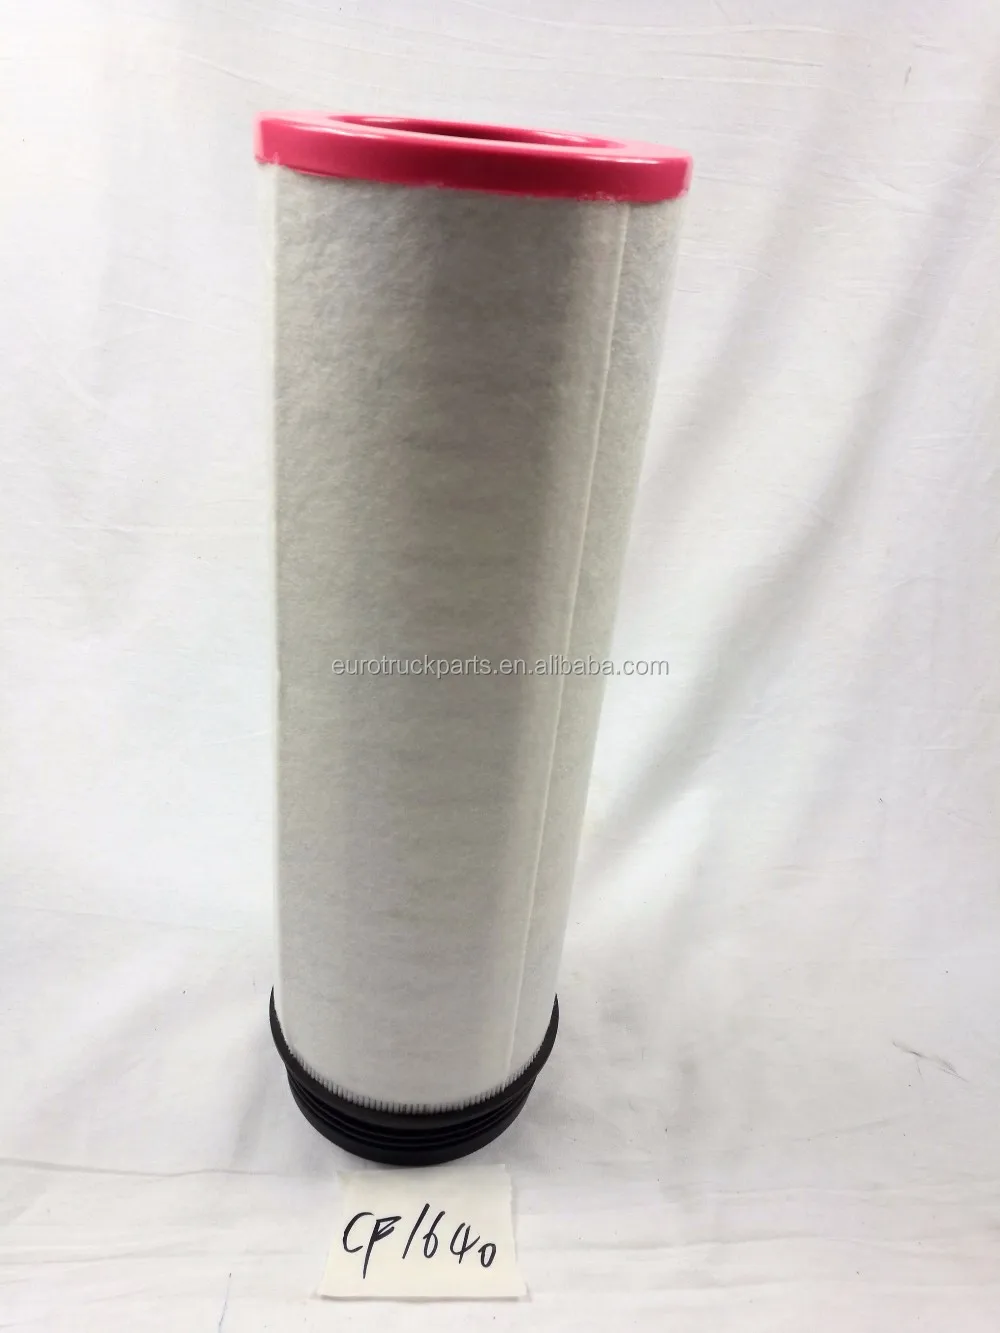 High quality air filter oem 81084050017 CF1640 for Man Tga heavy truck auto body parts (6).jpg